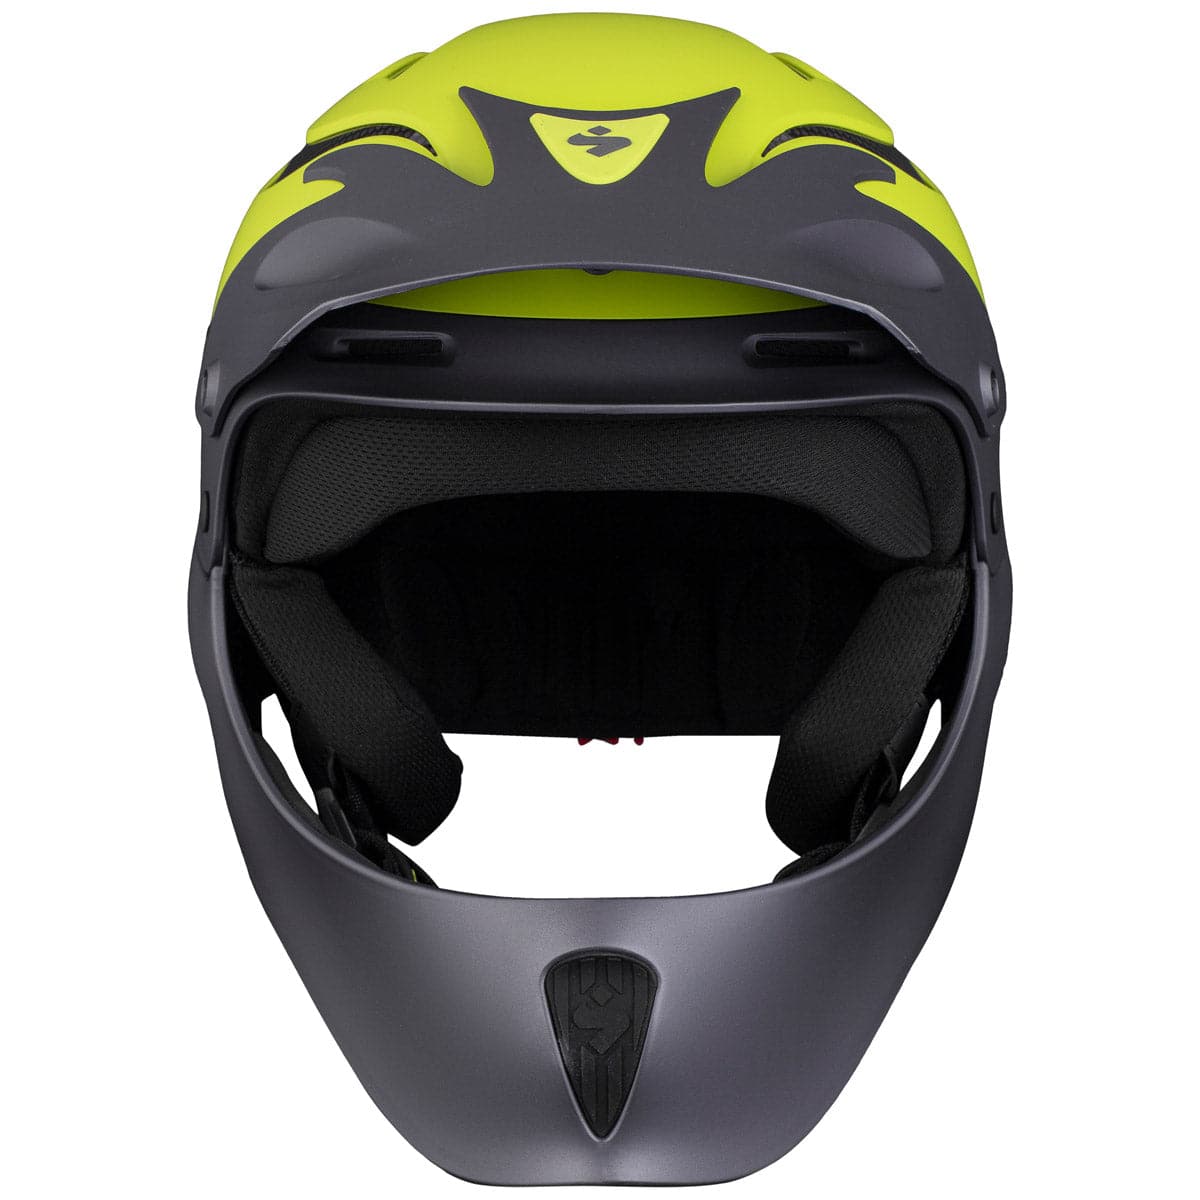 Featuring the Rocker Full Face Helmet helmet manufactured by Sweet shown here from a fourth angle.